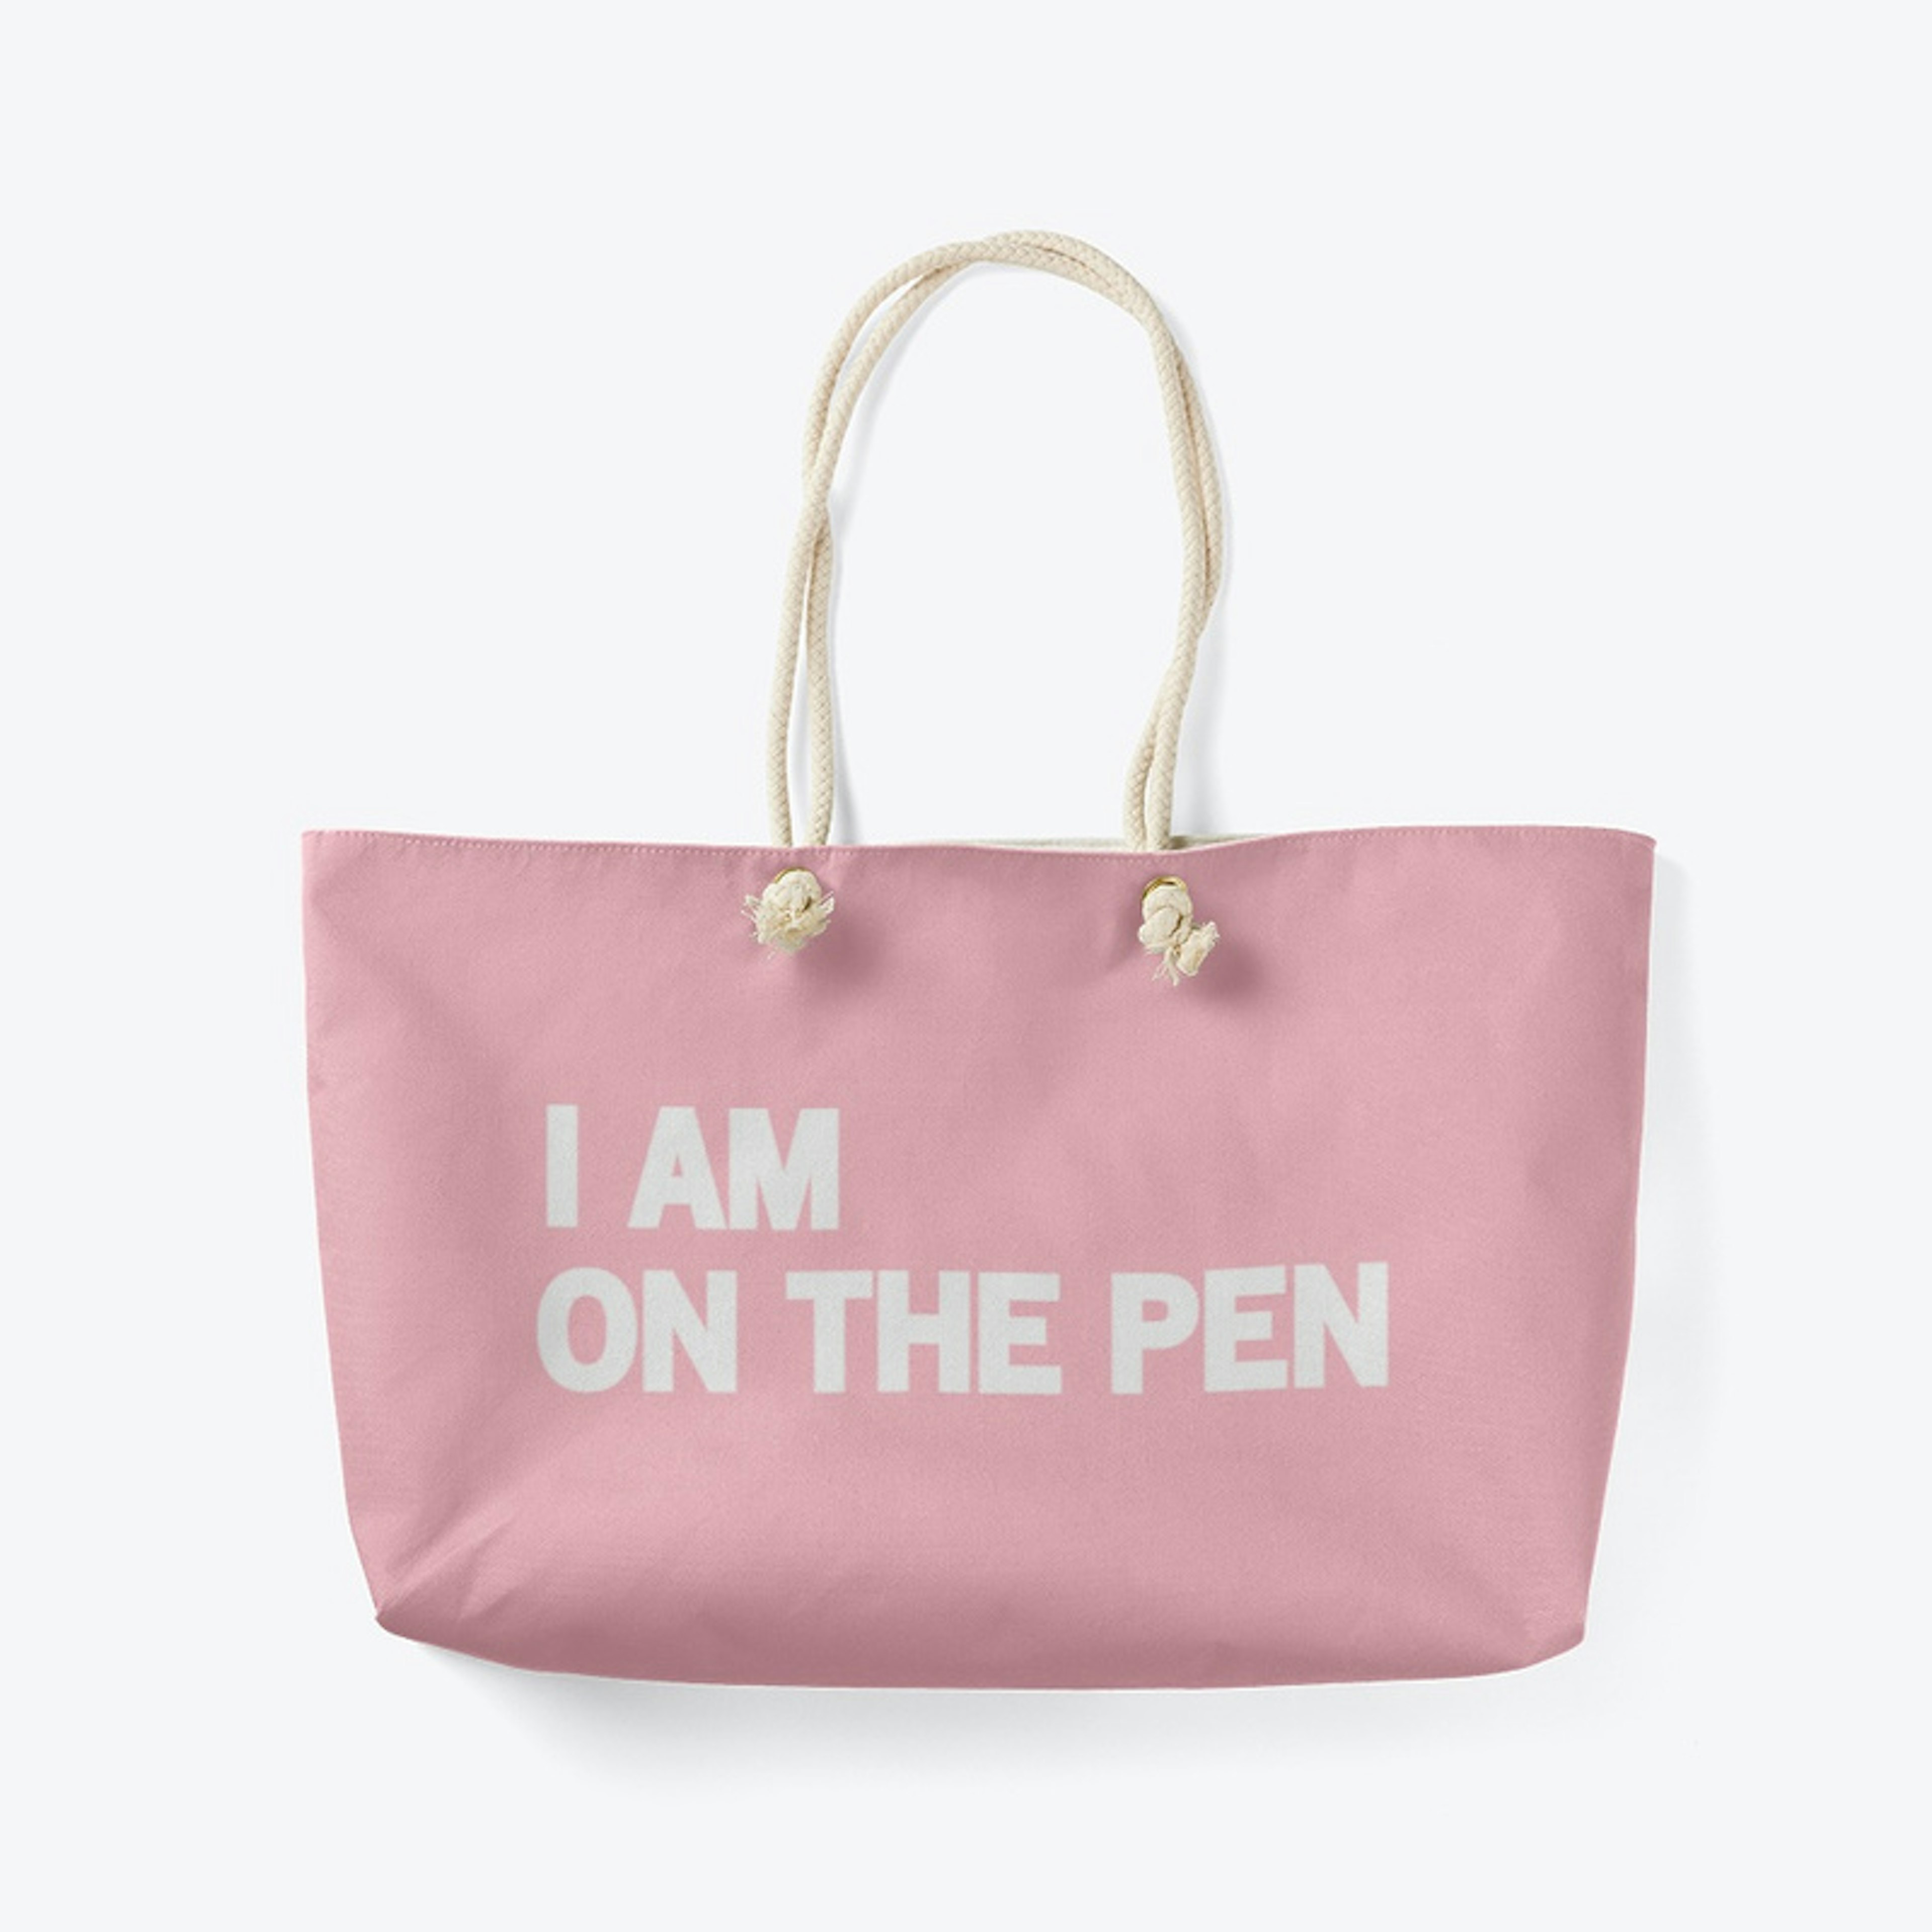 I AM ON THE PEN